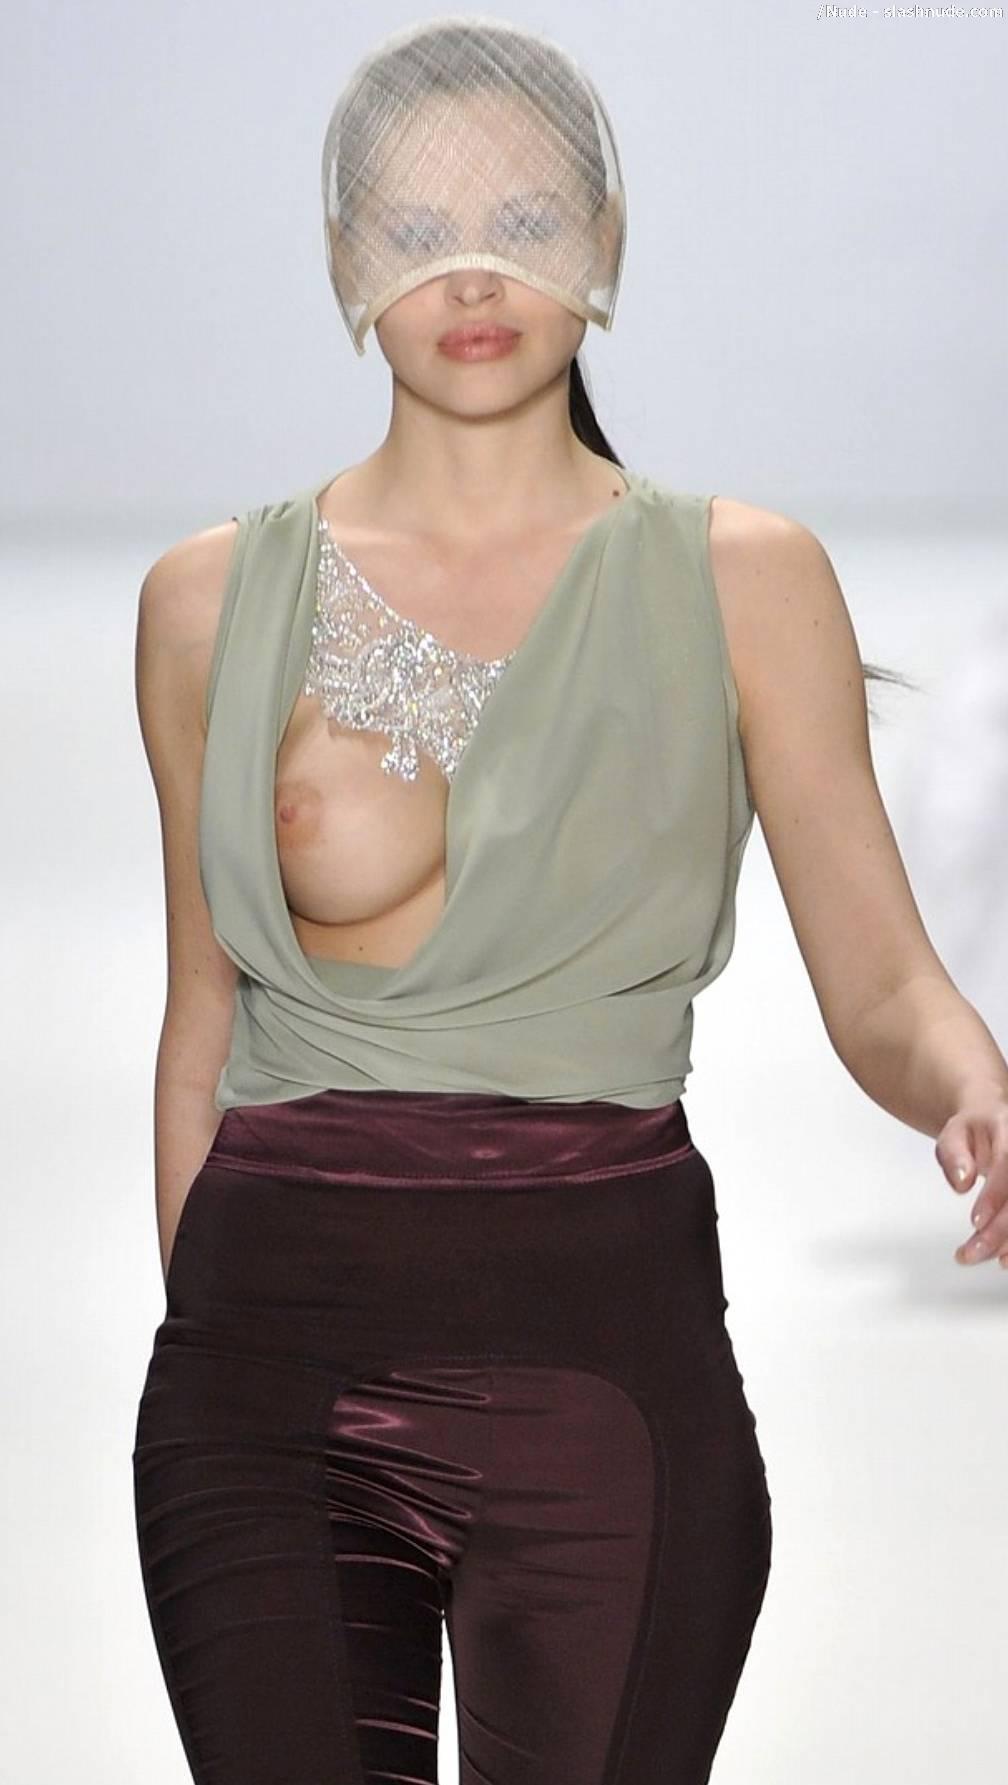 Hana Nitsche Breast Slips Out Of Her Top On Runway 8